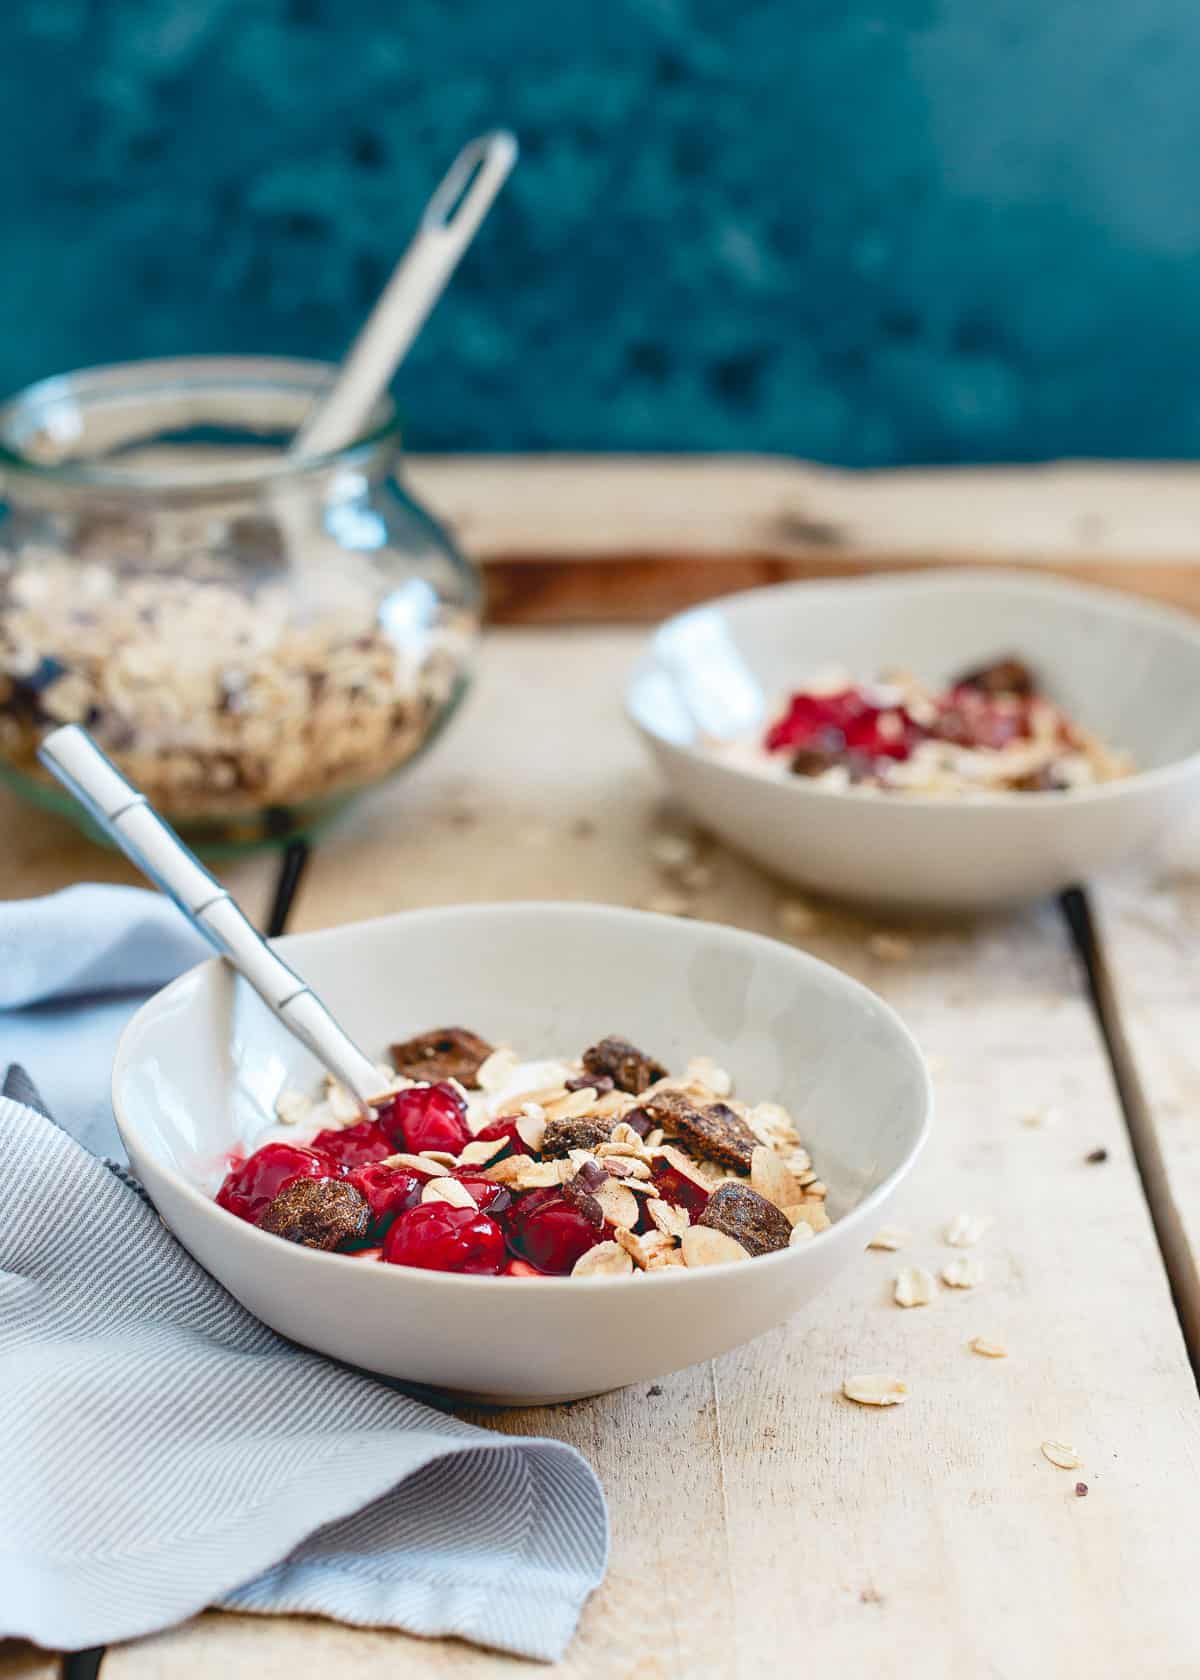 These breakfast yogurt bowls are topped with a tart cherry ginger muesli. Loaded with oats, almonds, cacao nibs, ginger, dried tart cherries and warm spices. With a swirl of cherry sauce, it's a tasty and nutritious way to start the day. 